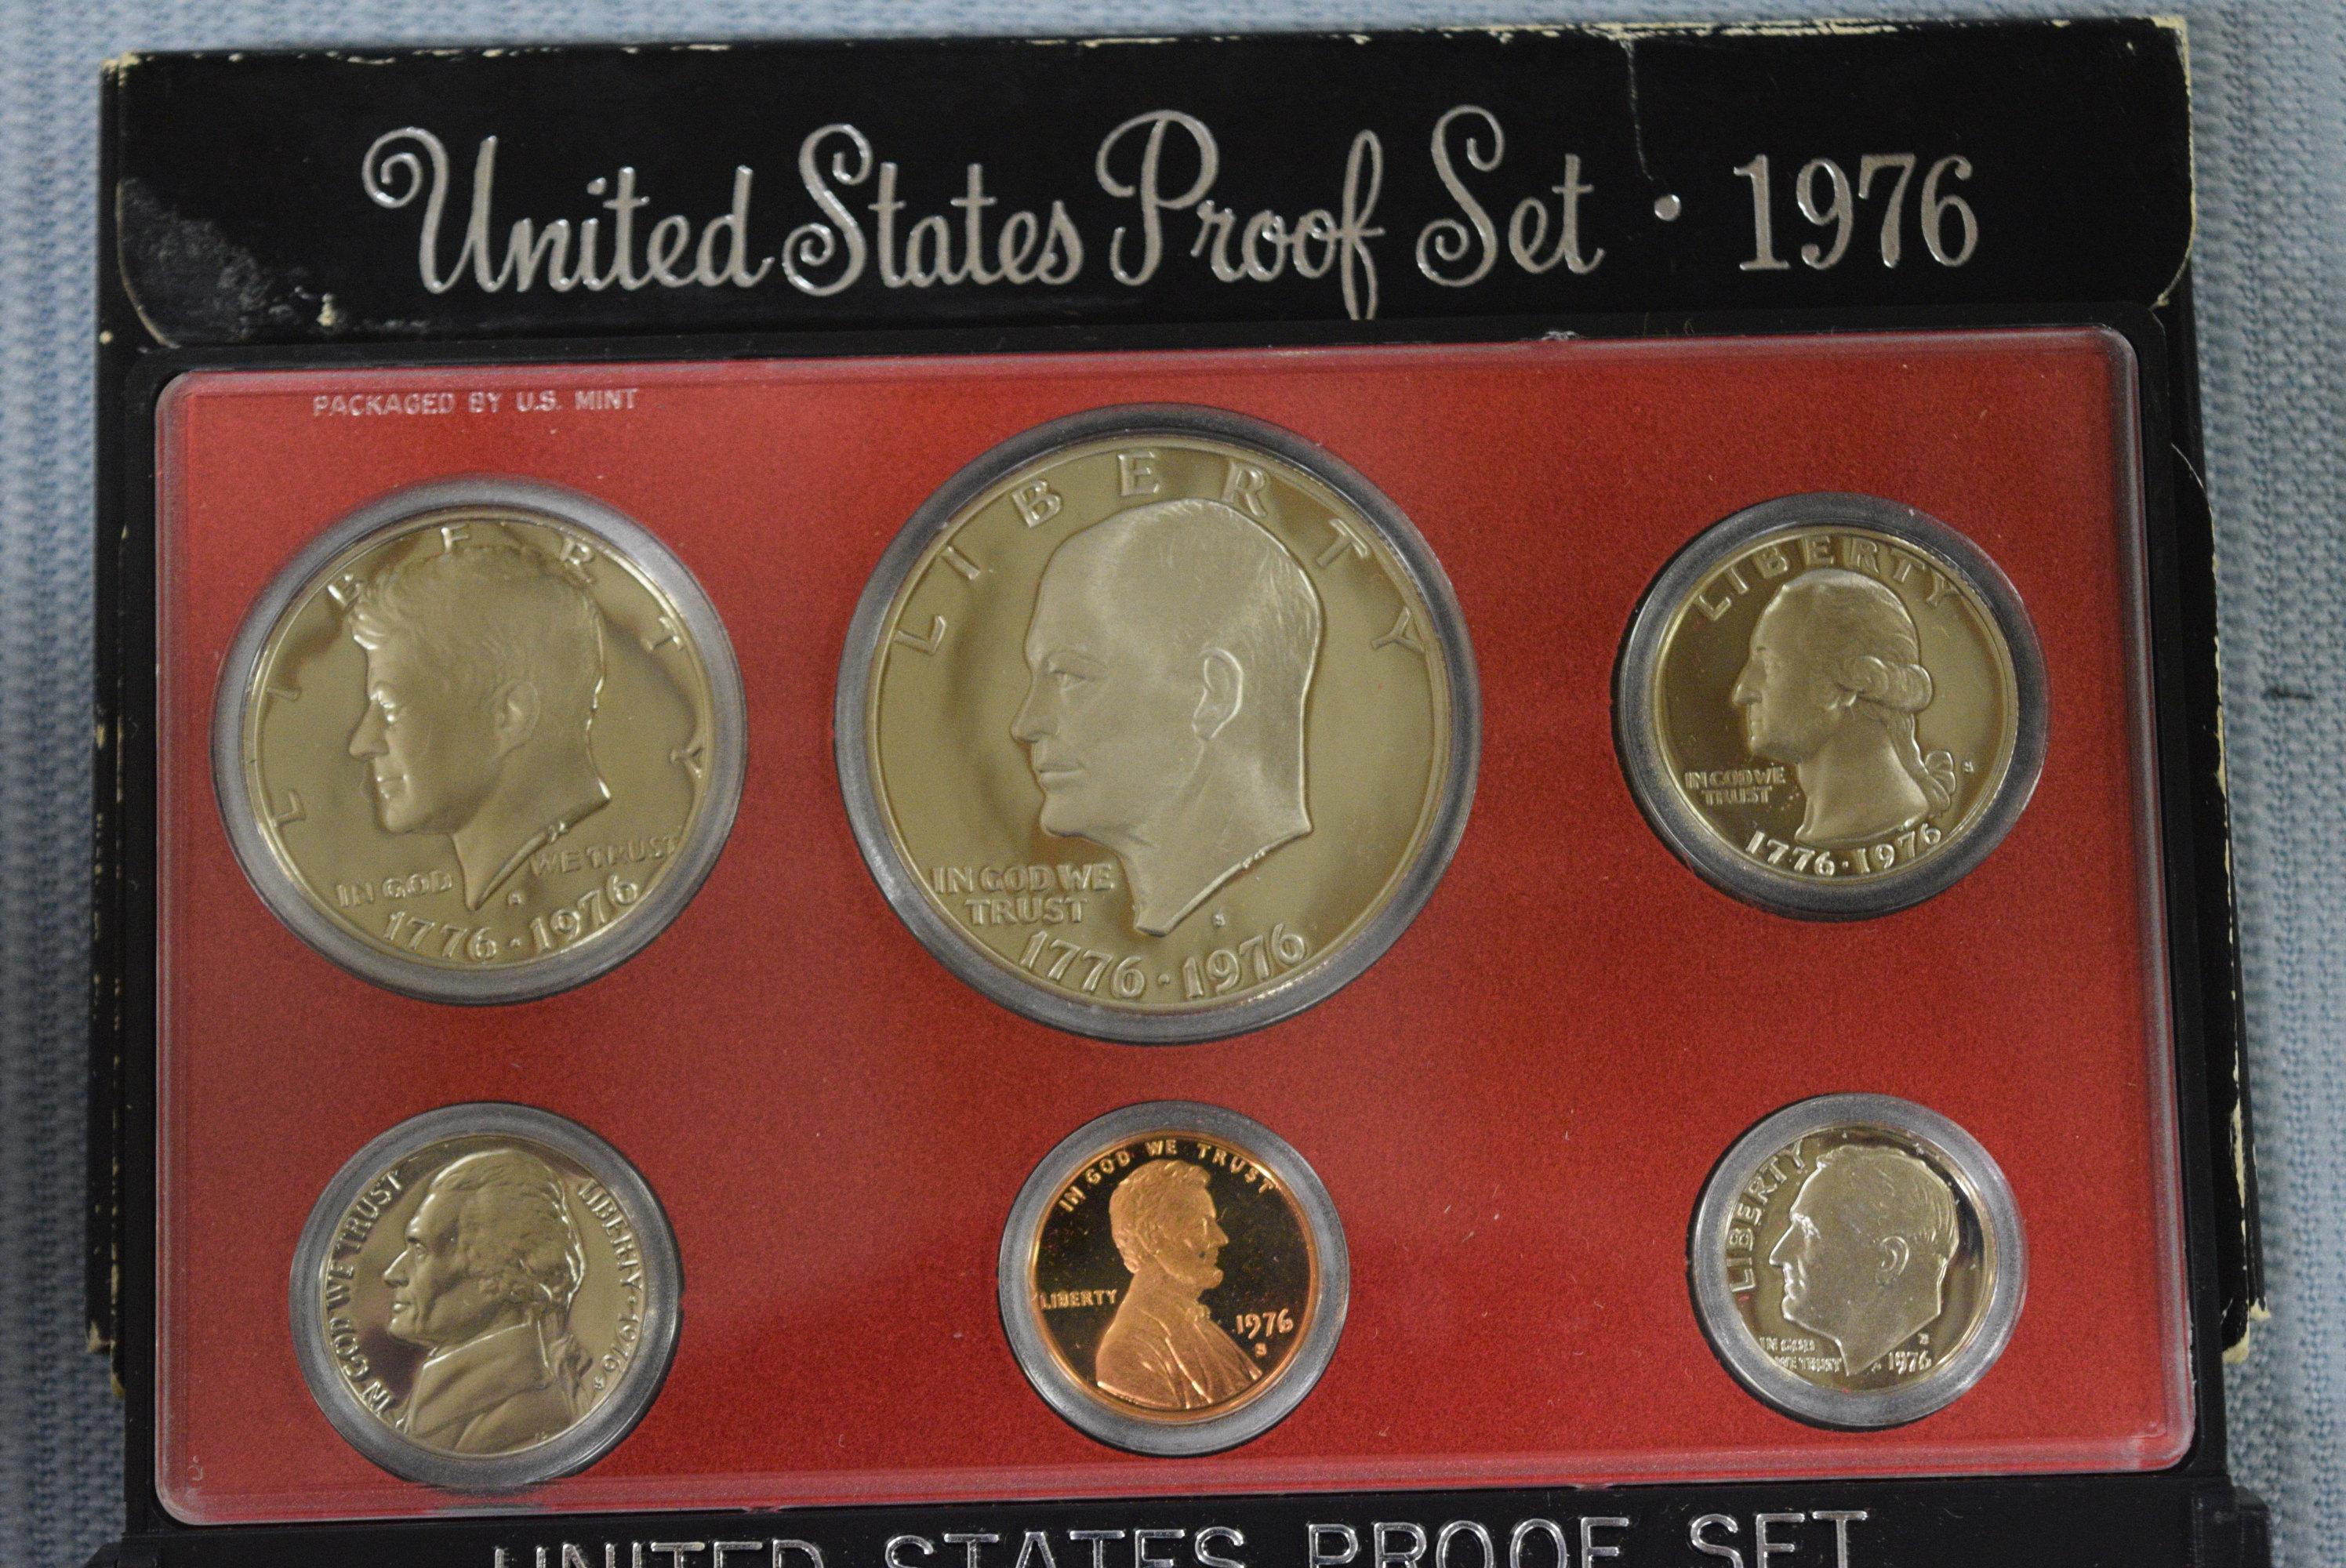 4 UNITED STATE PROOF SETS!